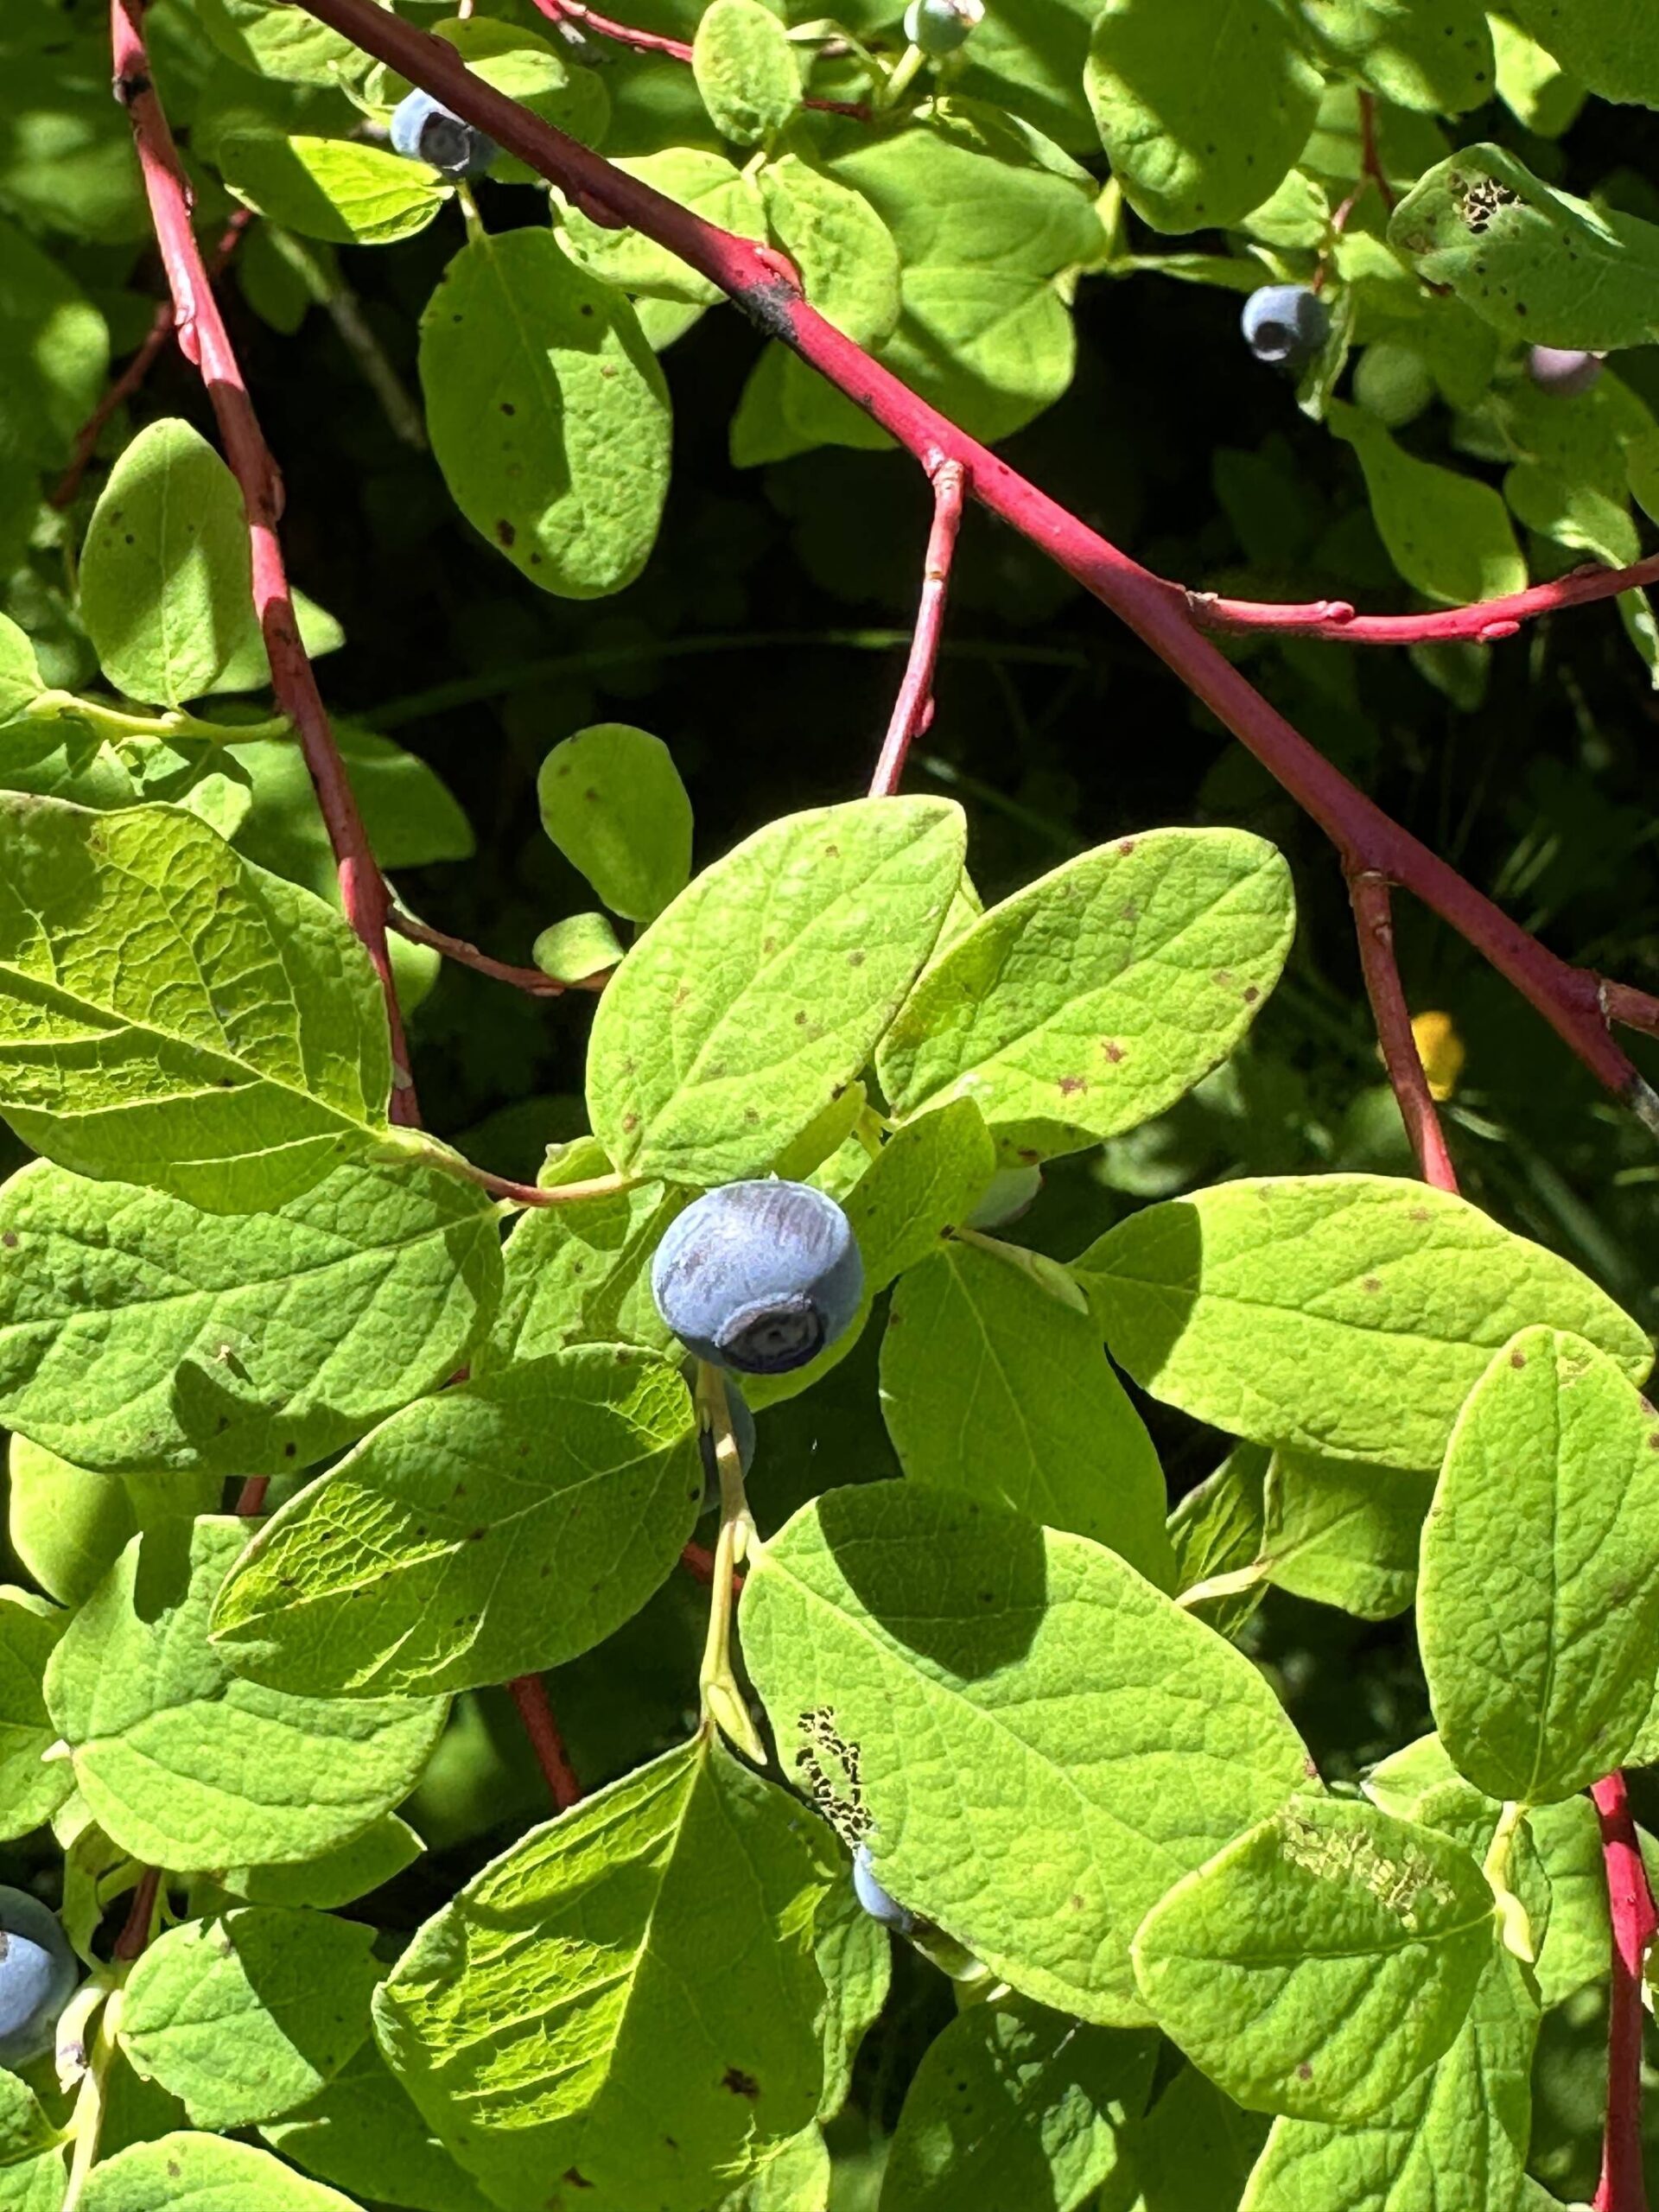 A blue huckleberry along the Horse Tram Trail on July 8. Most people call blueberries and blue huckleberries the same thing: blueberries. However, red huckleberries have green stems and blue huckleberries have red stems. (Photo by Deana Barajas)